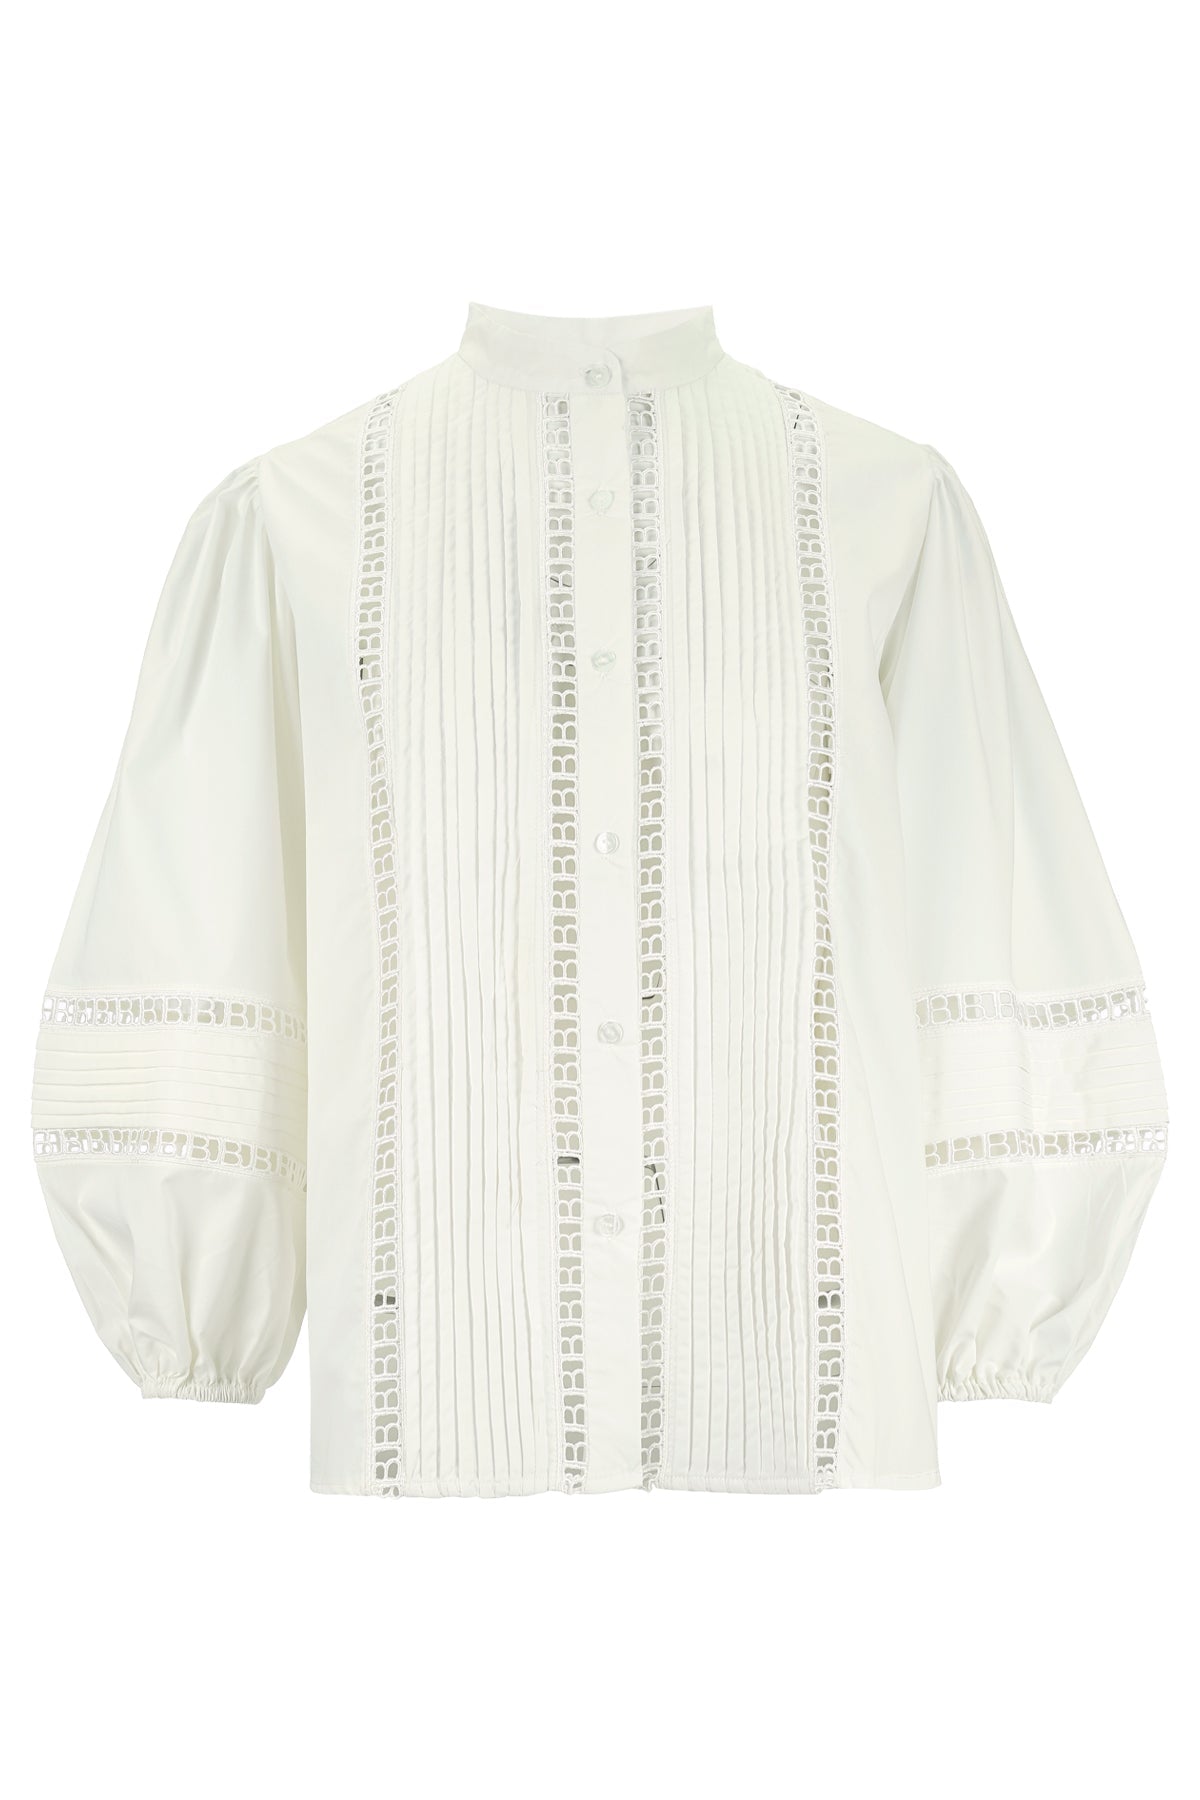 Avenly Lace Shirt - Broken White